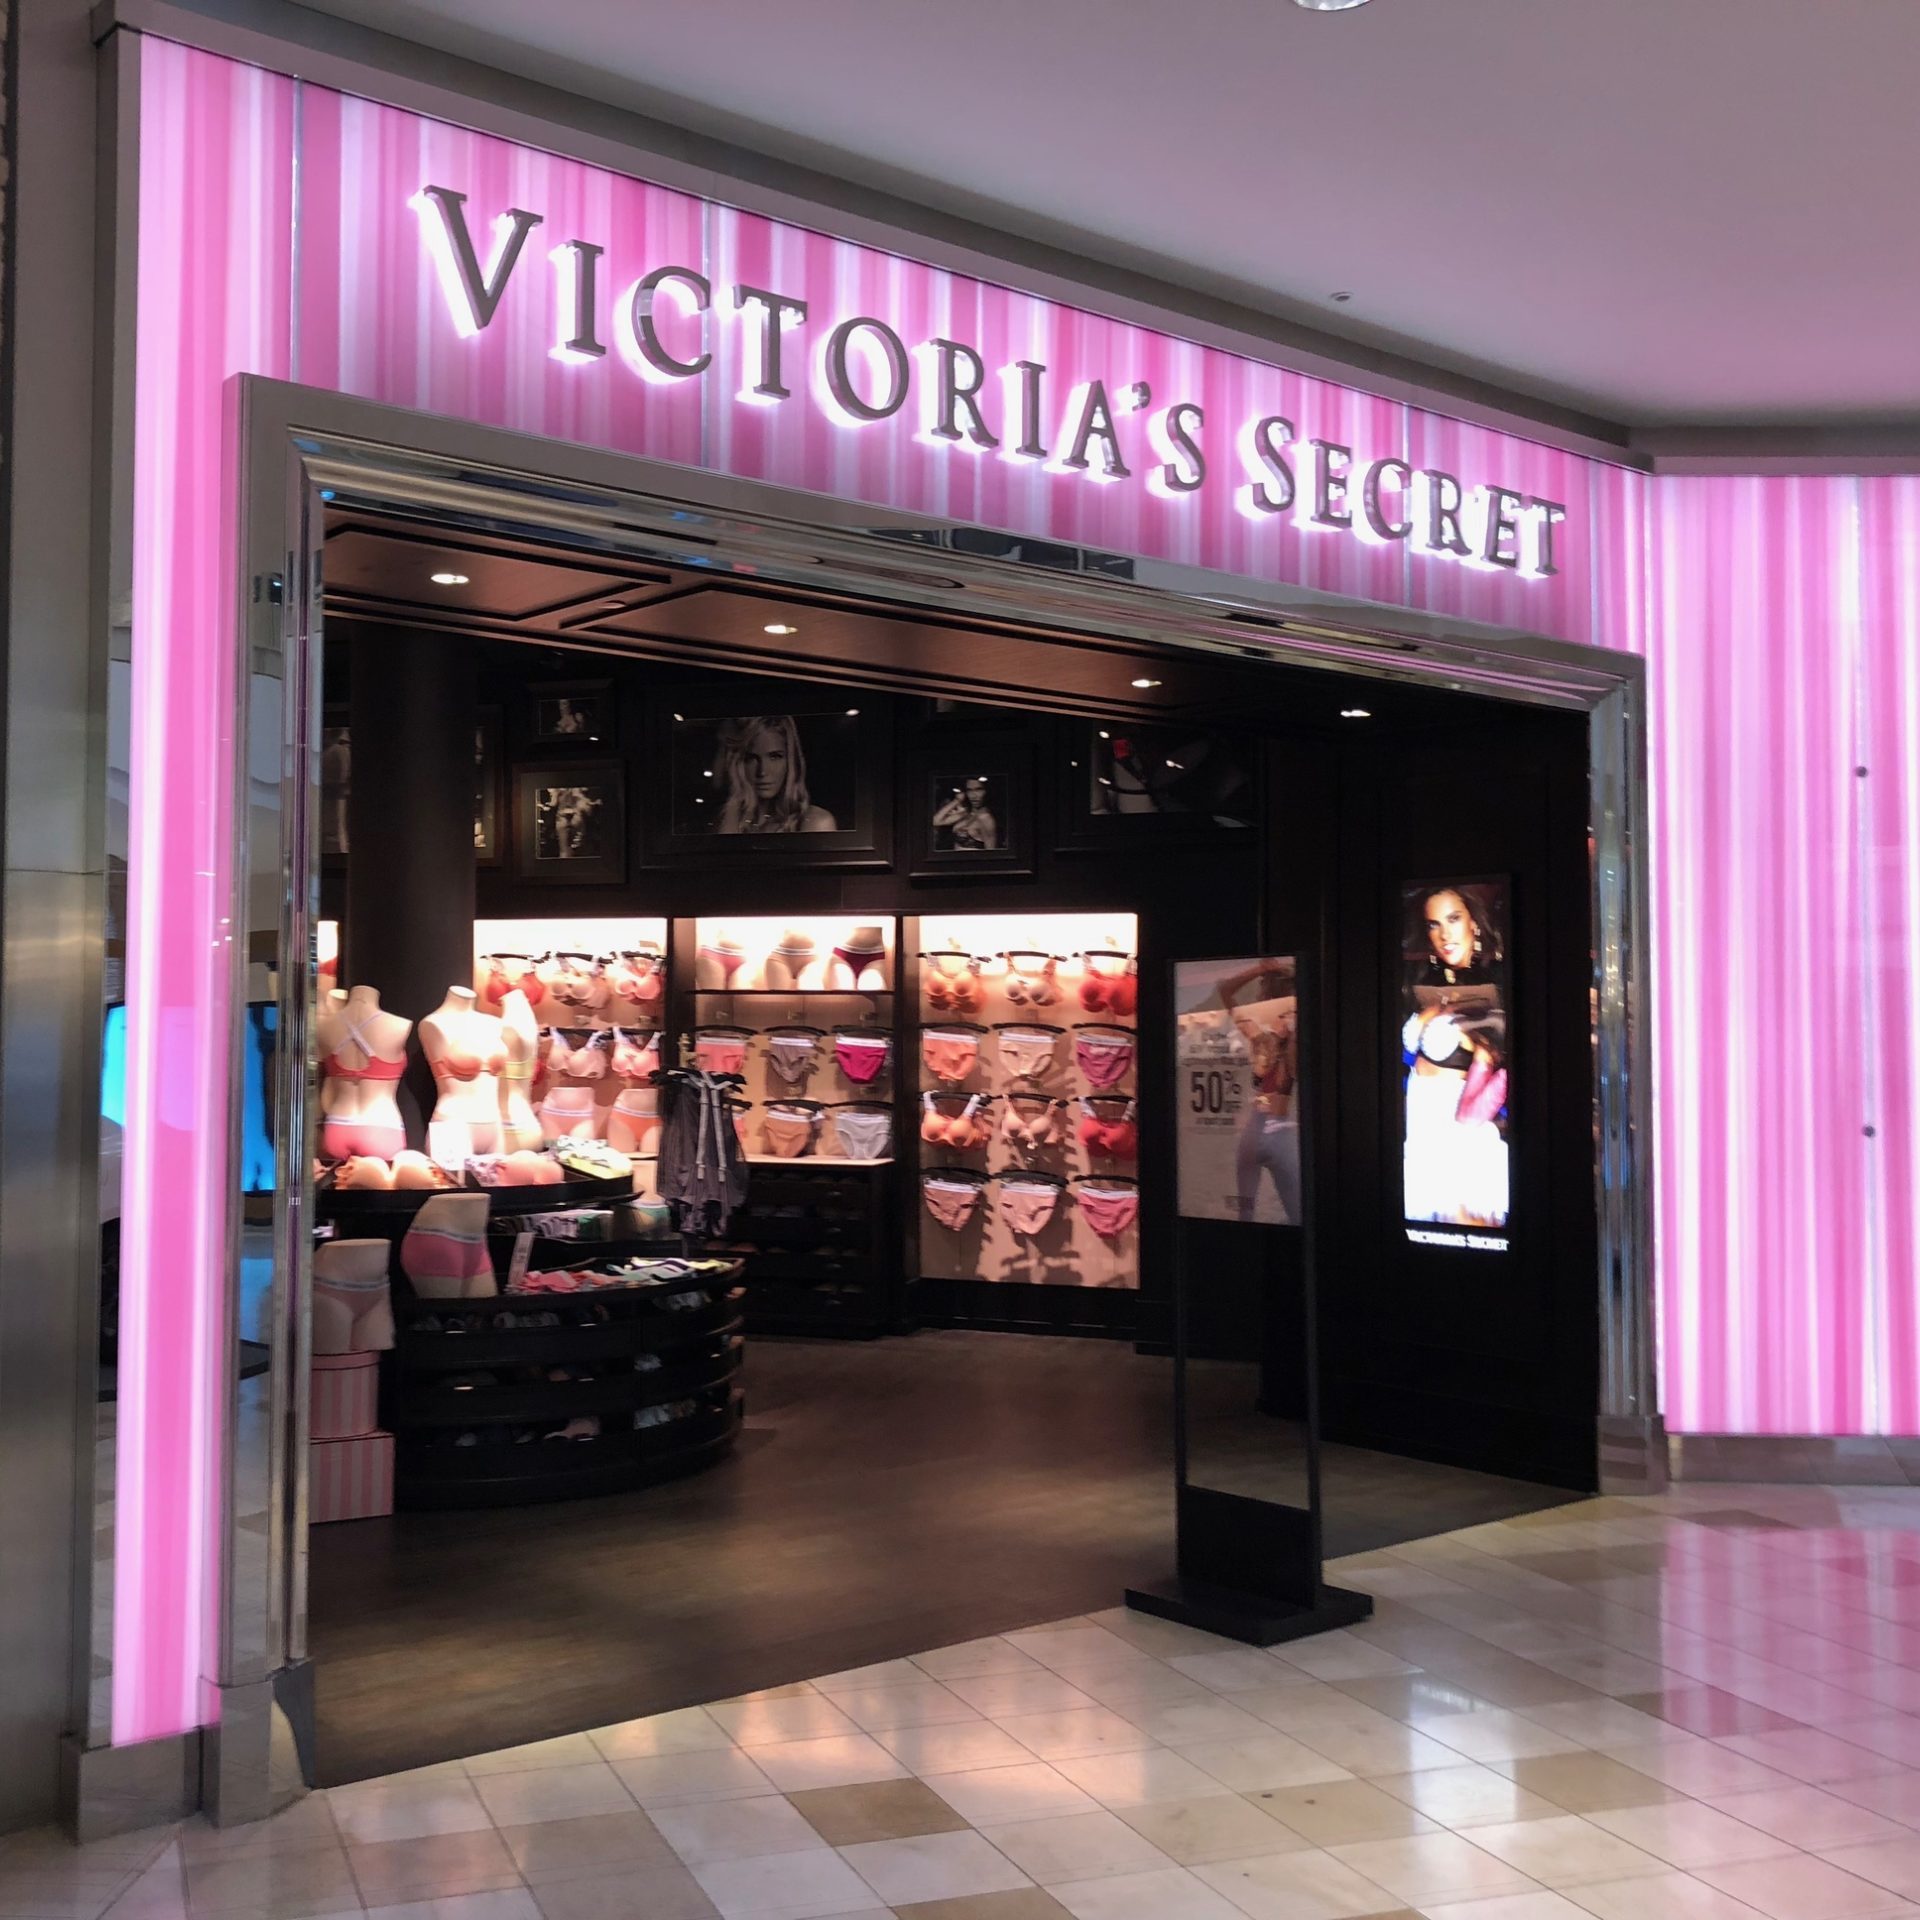 Victoria's Secret Find deals from 3 during the SemiAnnual sale